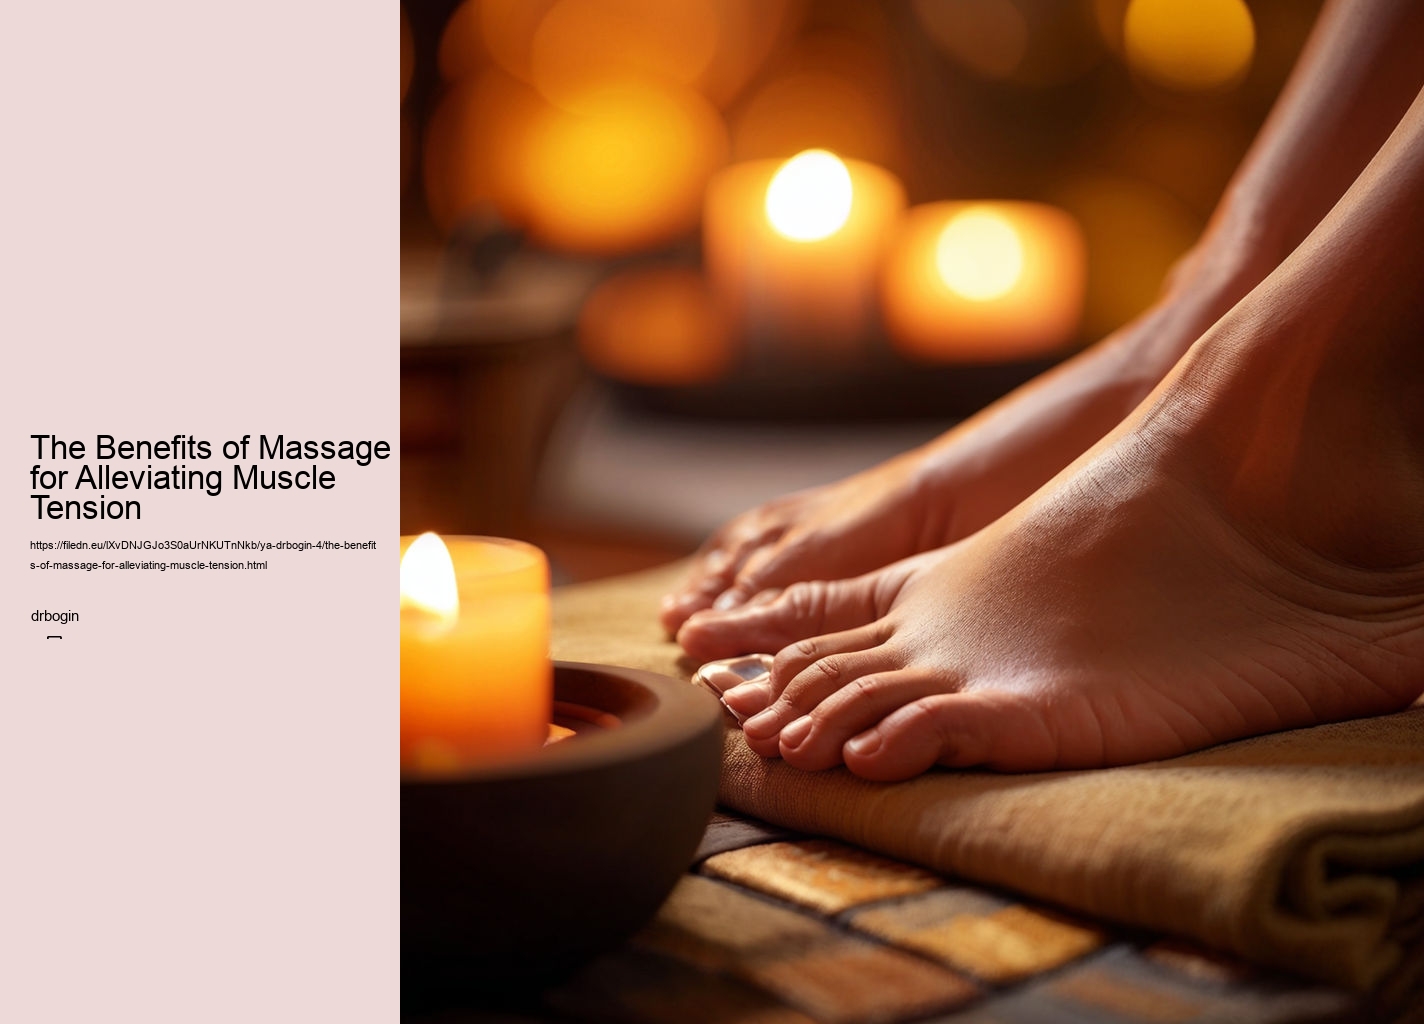 The Benefits of Massage for Alleviating Muscle Tension